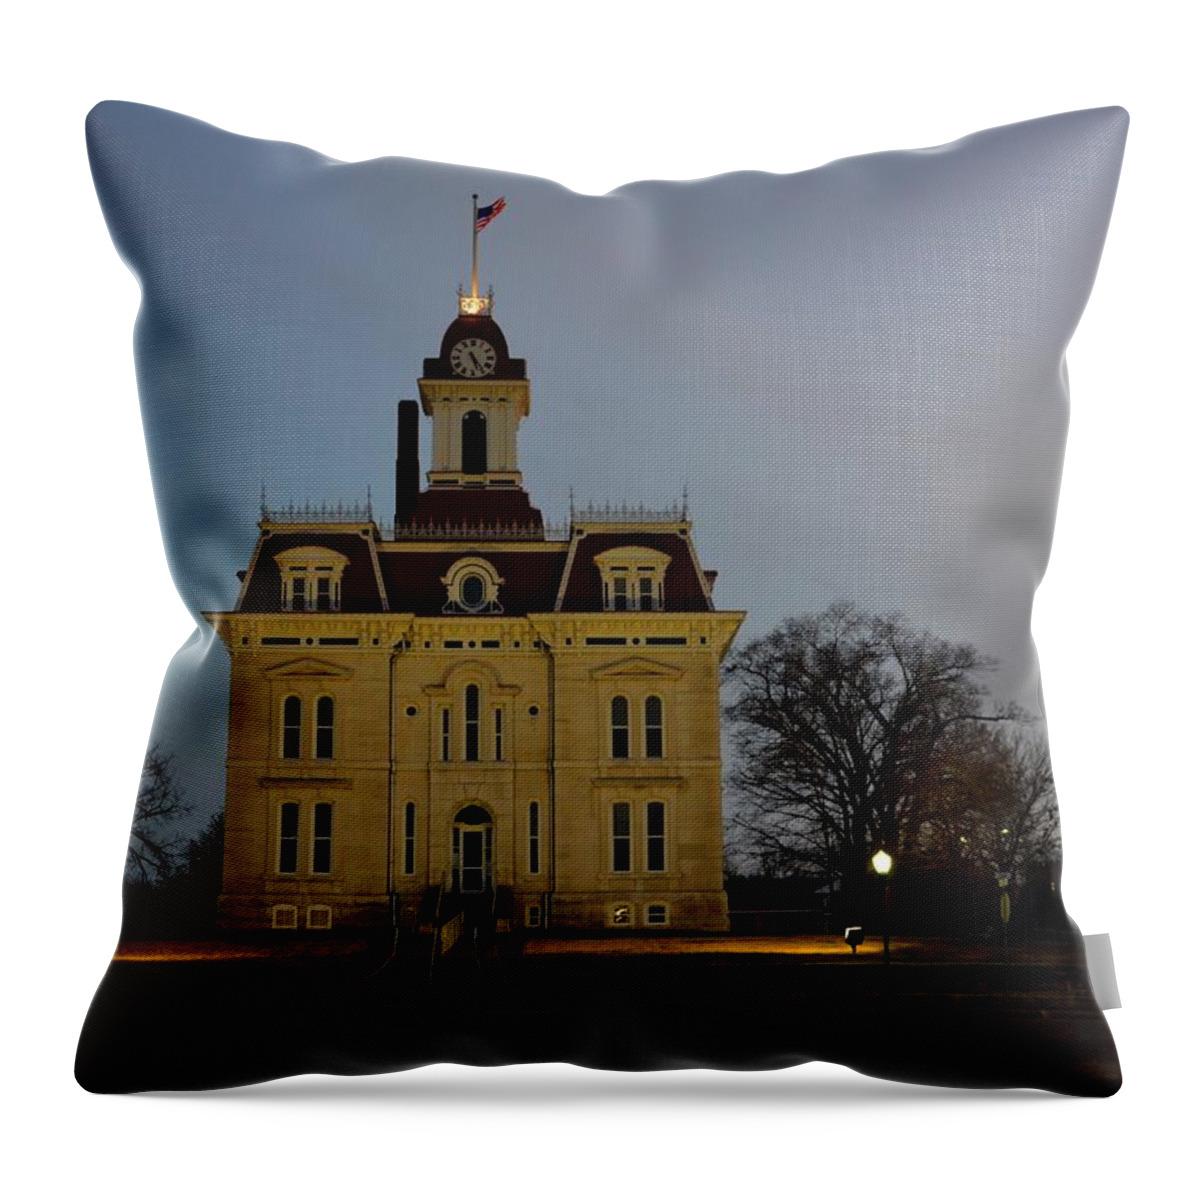 Courthouse Throw Pillow featuring the photograph Chase County Courthouse by Keith Stokes